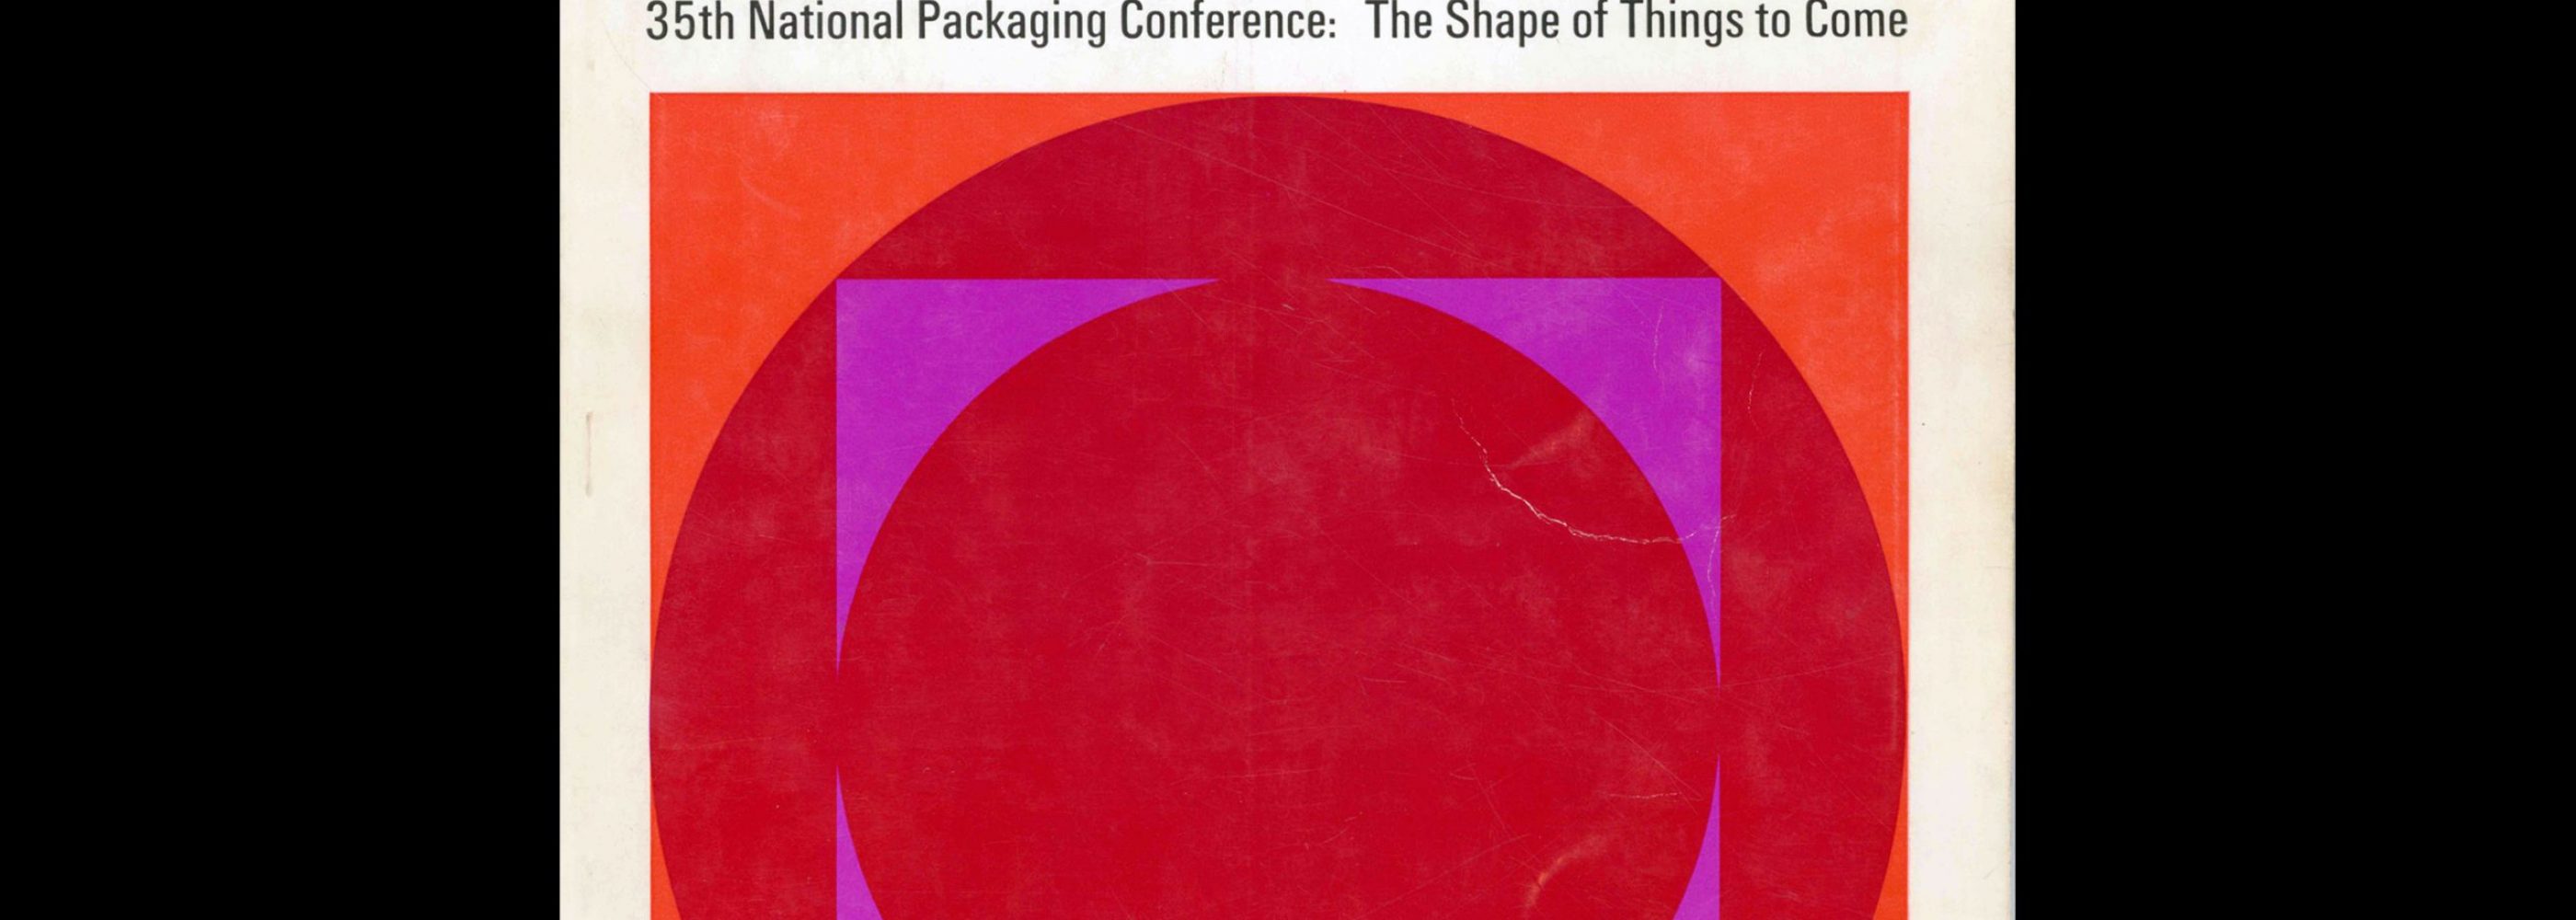 Packaging Design Vol 7, No 2, 1966. Cover design by Andrew P. Kner